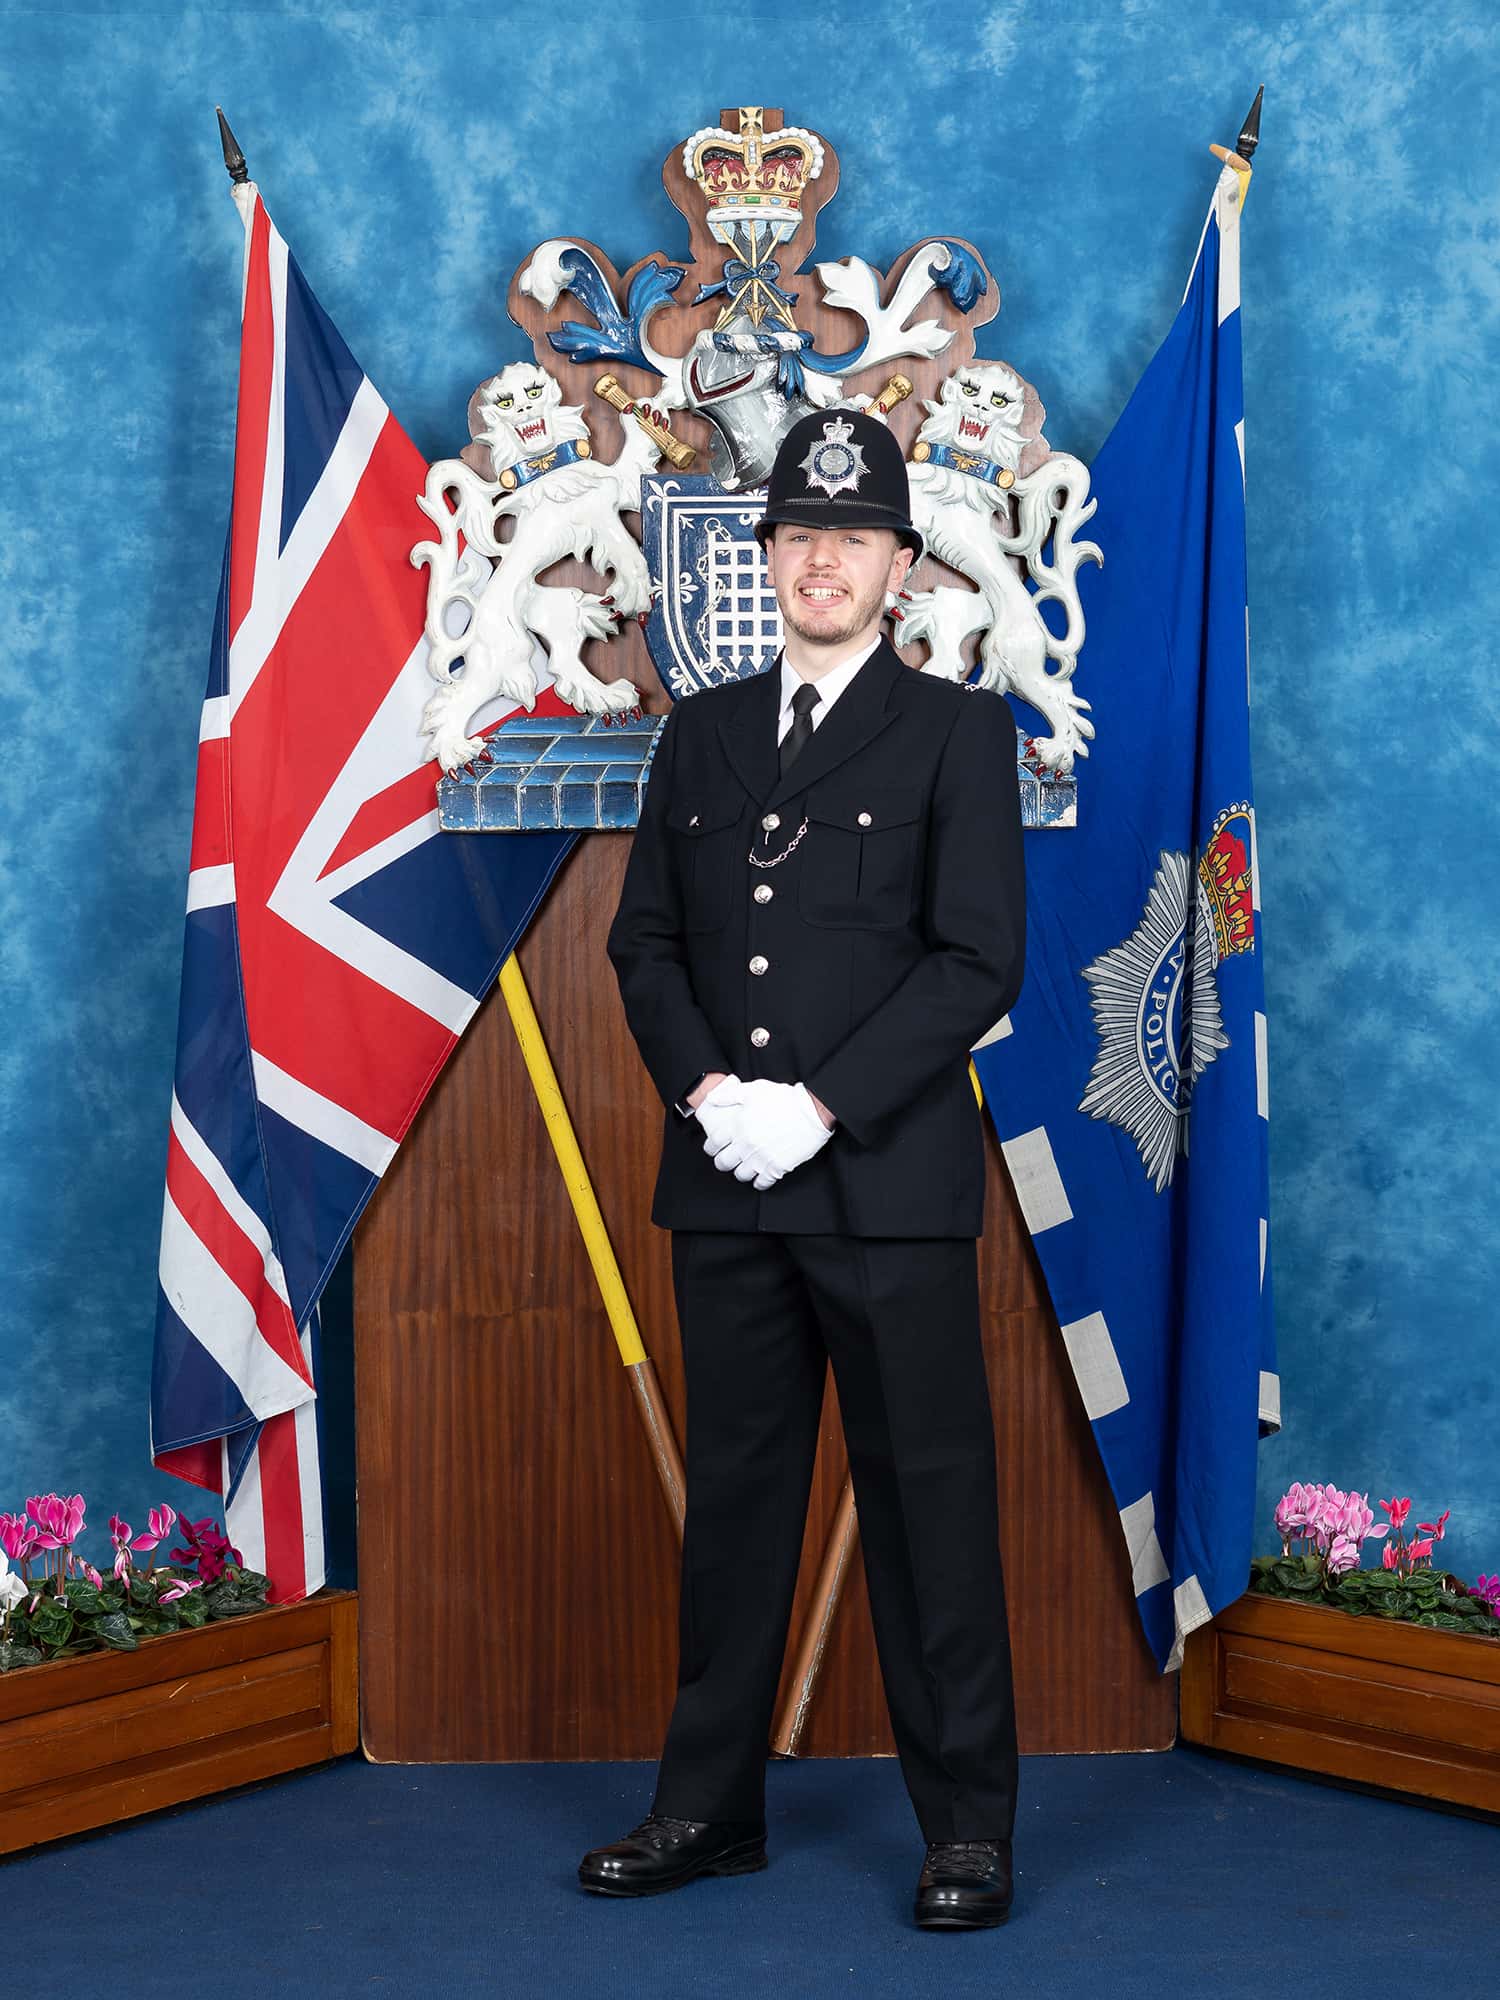 PC Beckley (credit Monty's photography)